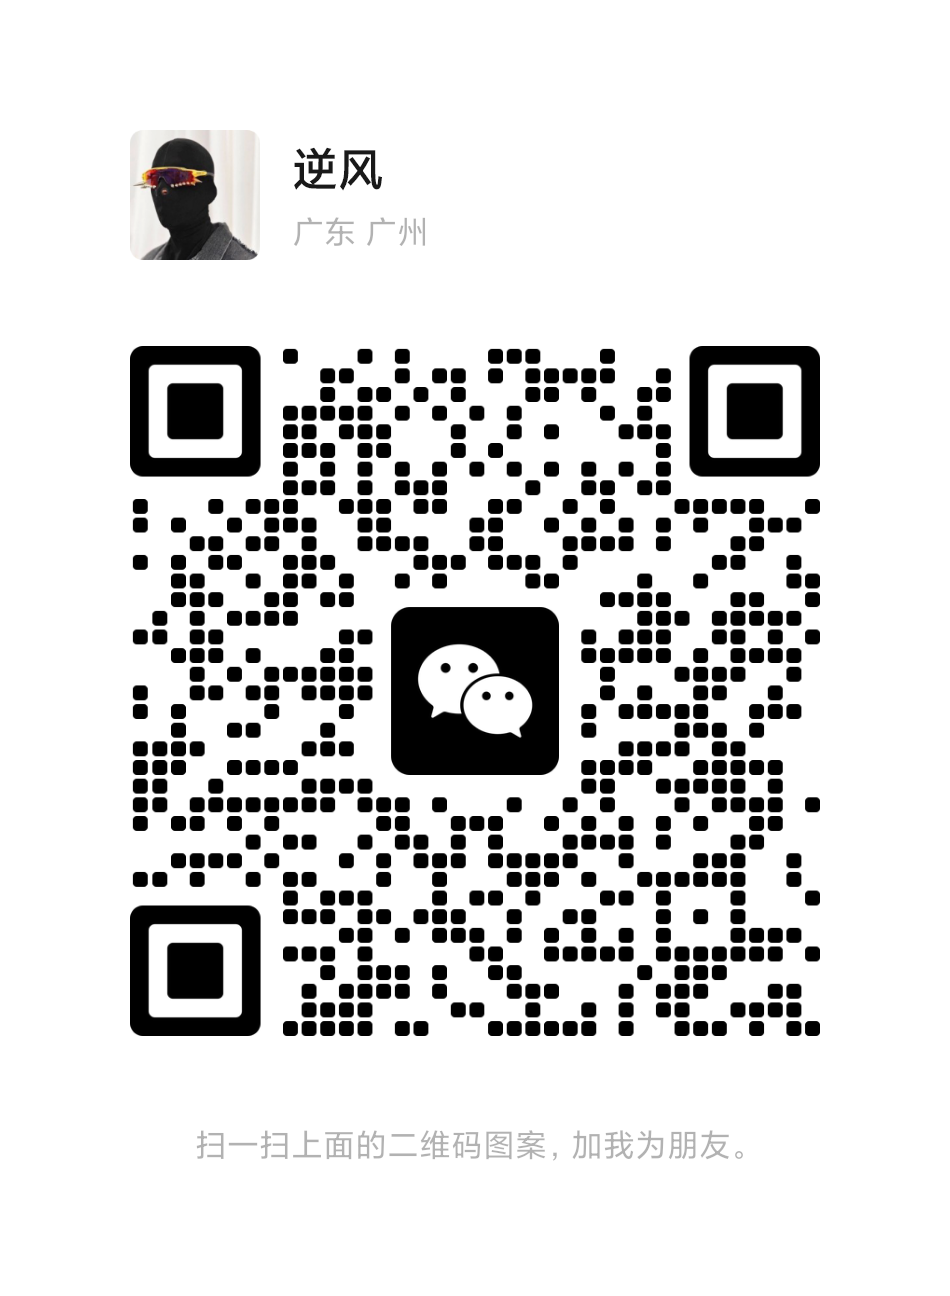 mmqrcode1667117522409.png